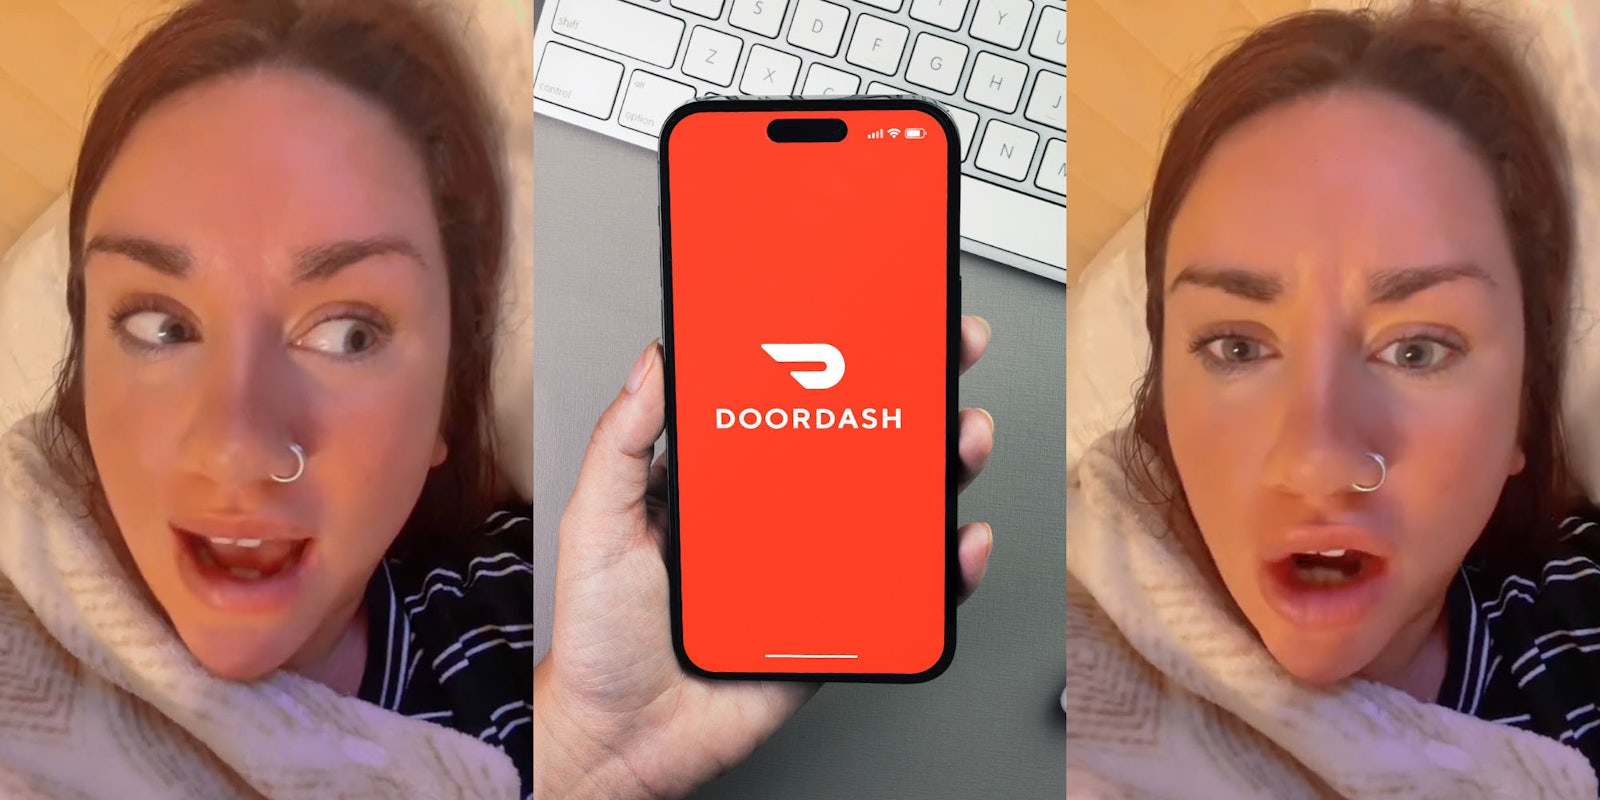 woman laying in bed speaking (l) hand holding phone with DoorDash on screen in front of keyboard (c) woman laying in bed speaking (r)